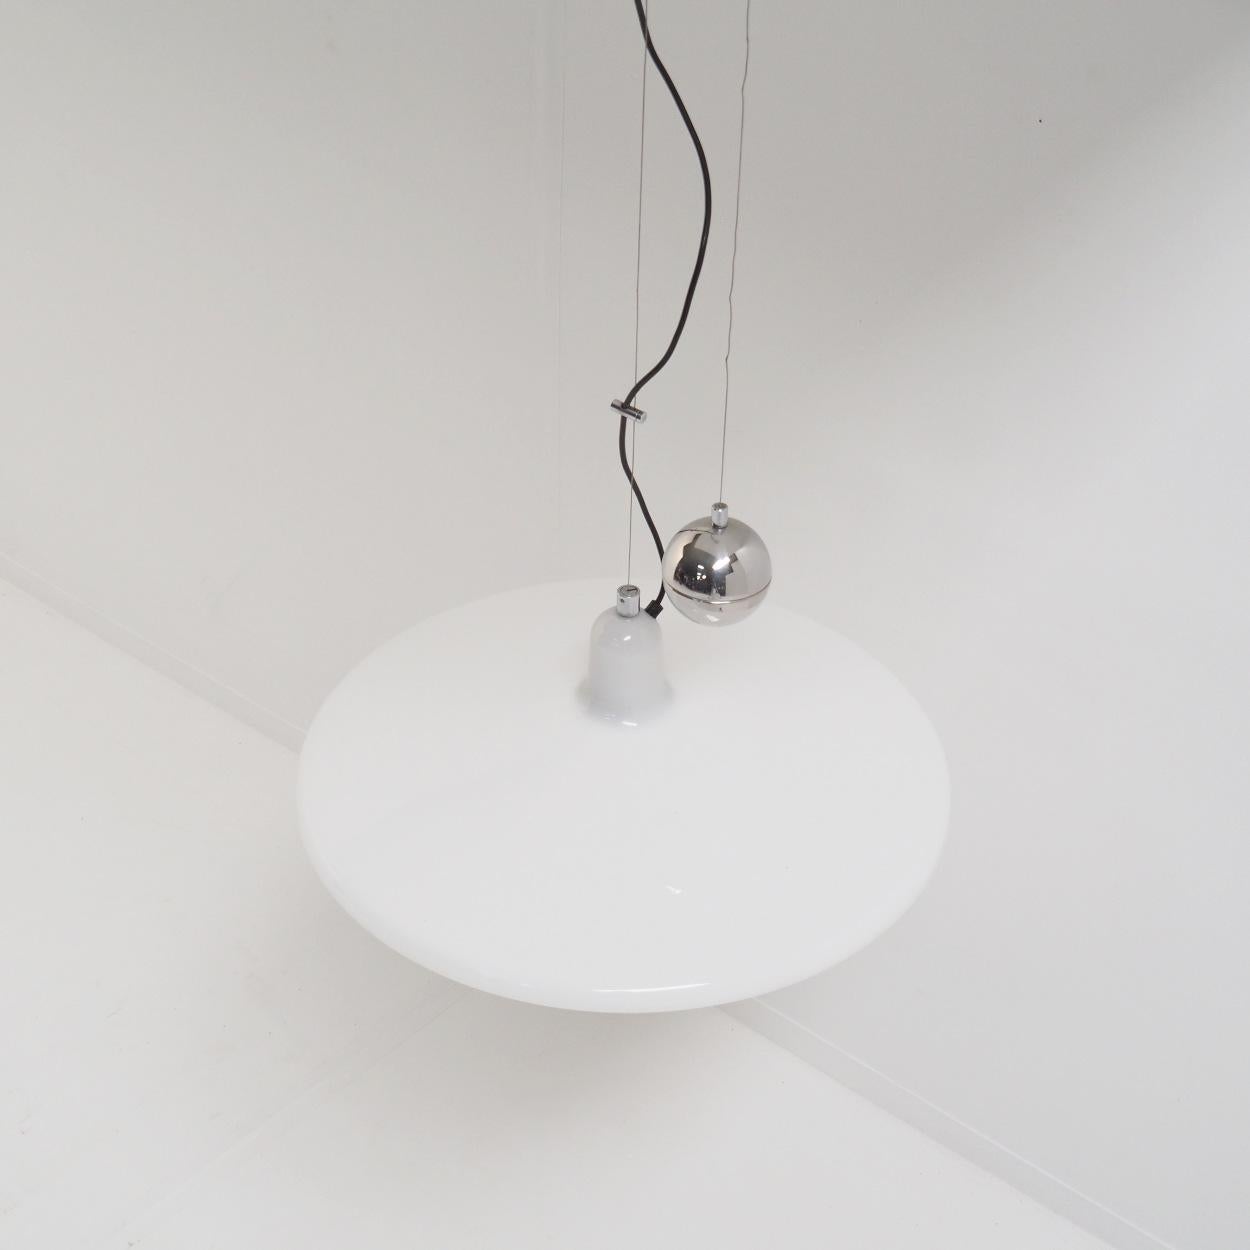 ‘Manta’ Counterweight Pendant by Franco Bresciani for iGuzzini In Good Condition For Sale In Beerse, VAN